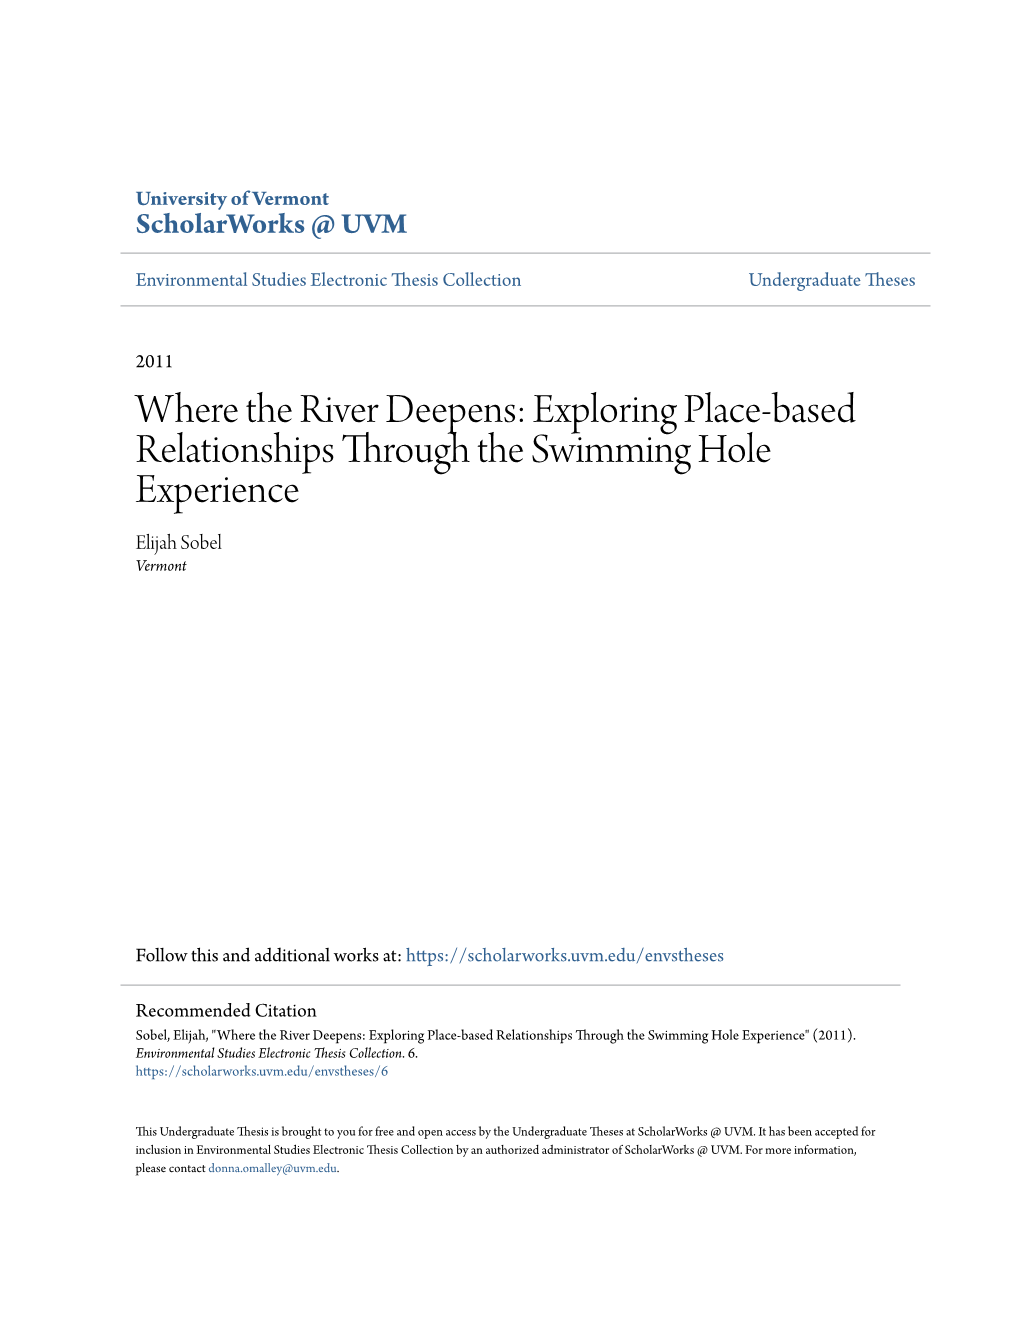 Where the River Deepens: Exploring Place-Based Relationships Through the Swimming Hole Experience Elijah Sobel Vermont